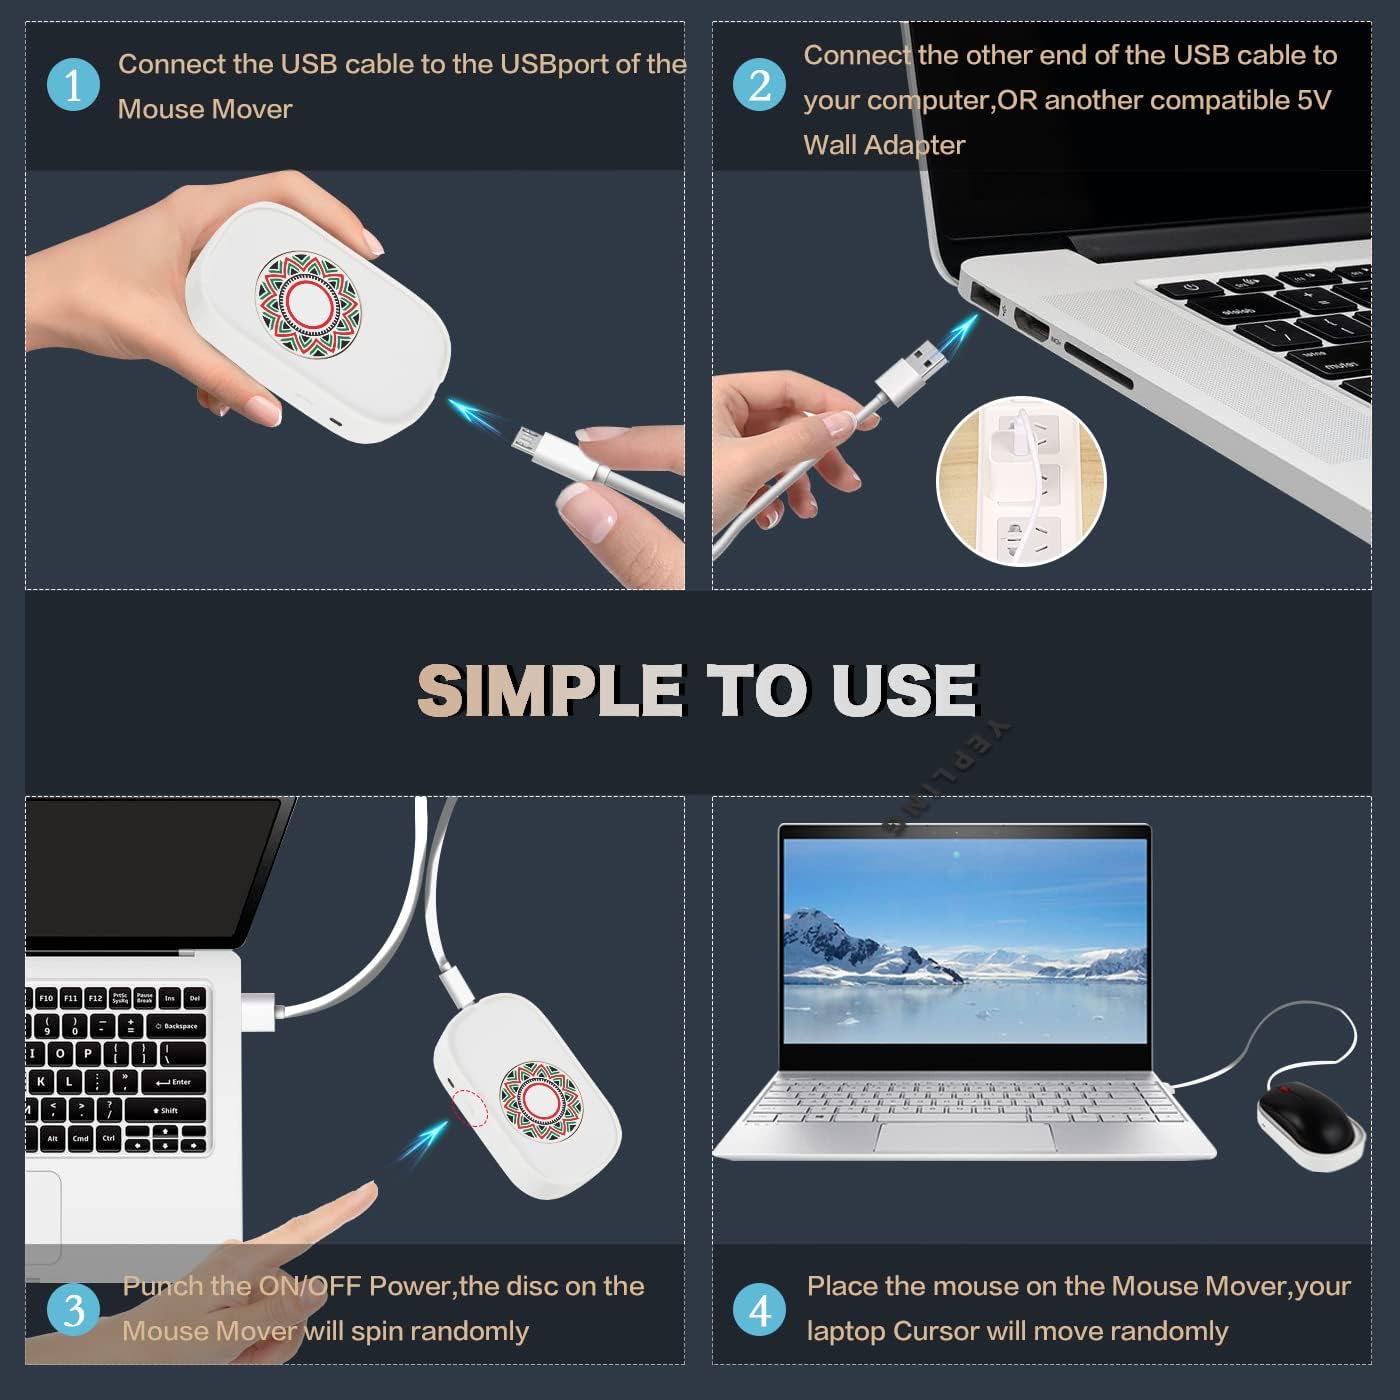 Undetectable-Mouse-Mover-Mouse-Jiggler-Keeps-PC-Active-No-Software-Randomly-Automatic-Driver-Free-Prevents-Computer-Laptops-From-Sleeping-Modes-44